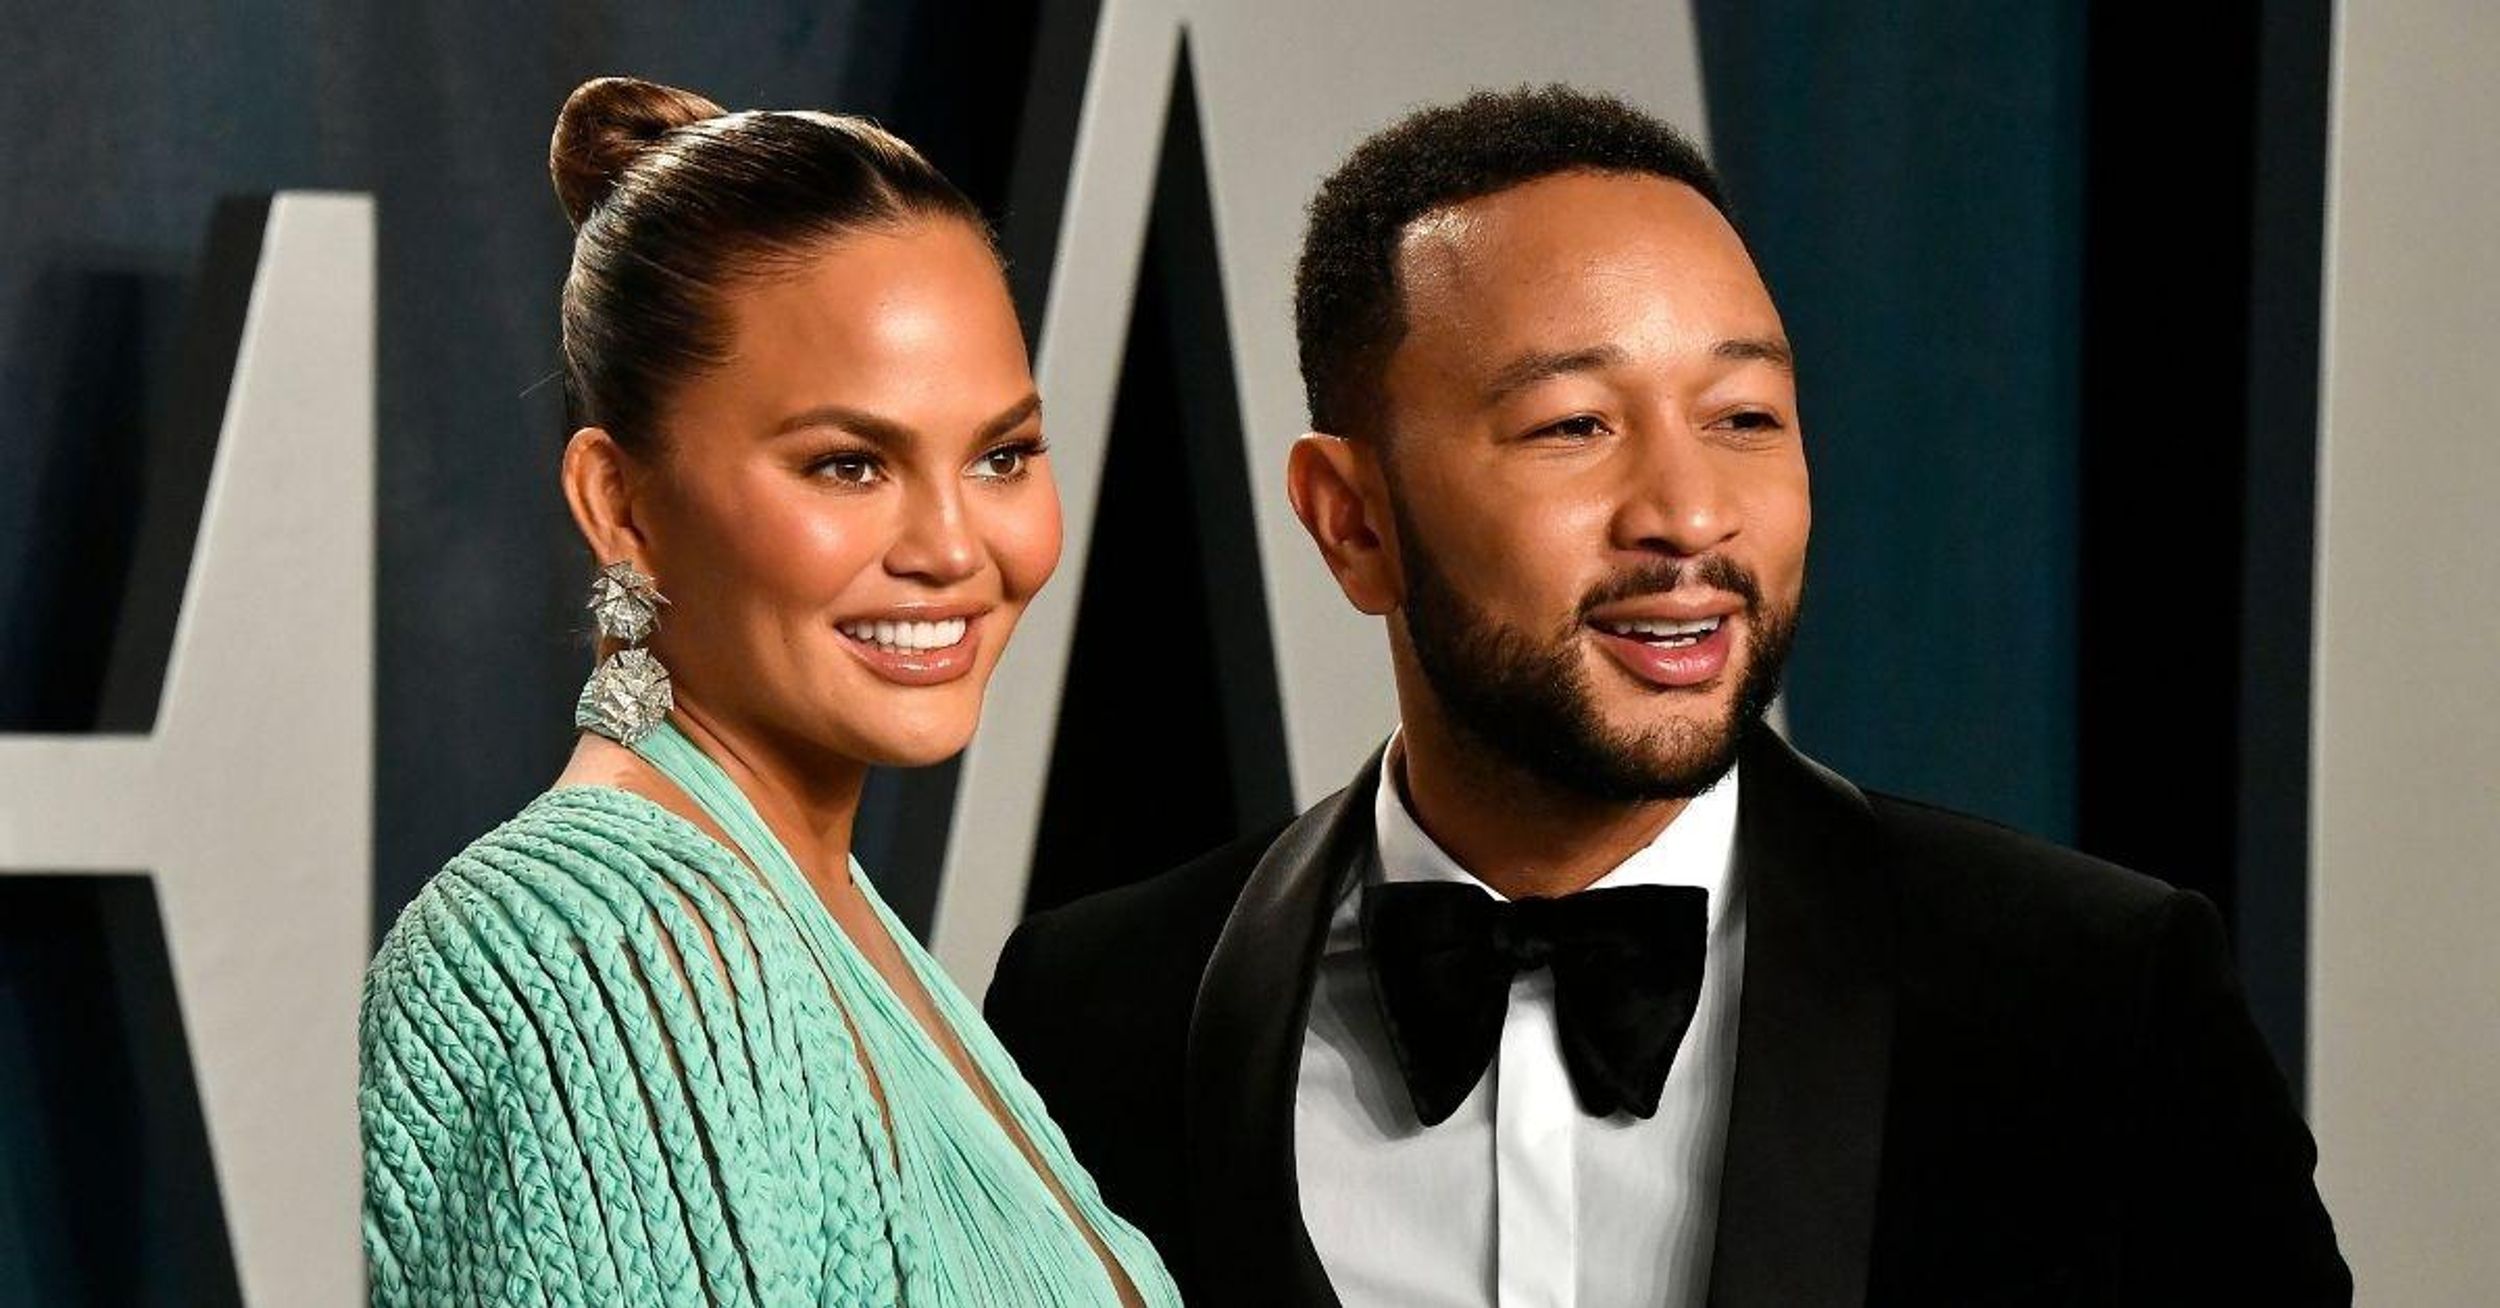 Chrissy Teigen's Disastrous Family Photoshoot Has Parents Sharing Their Own Hilarious Mishaps